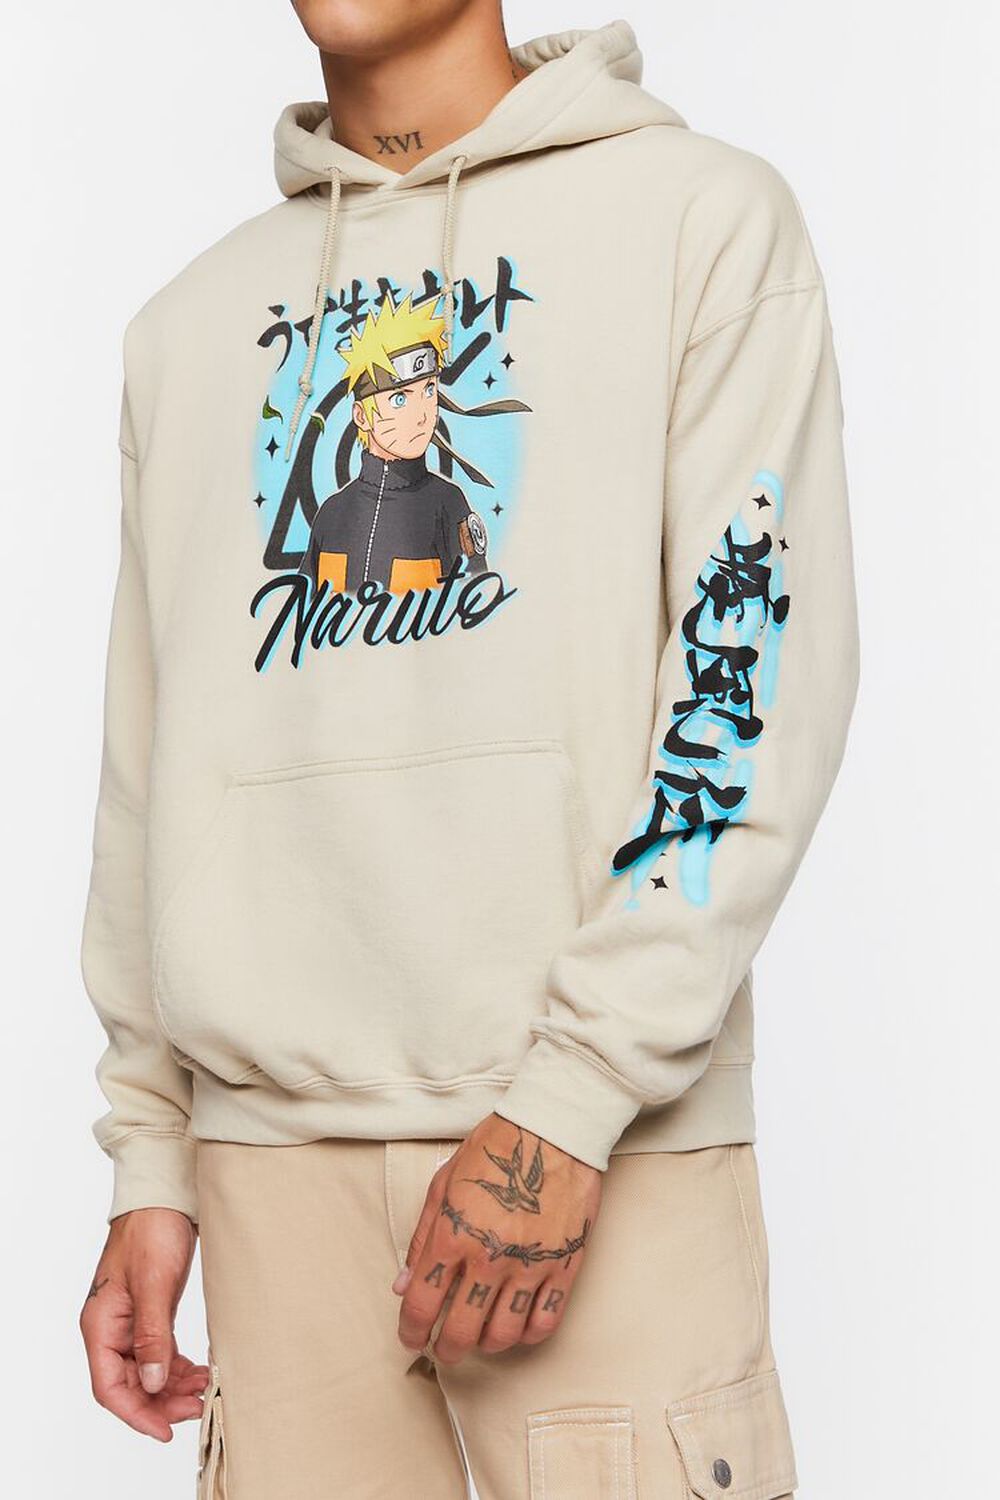 Naruto Shippuden x Hello Kitty & Friends Graphic Tee, Forever 21